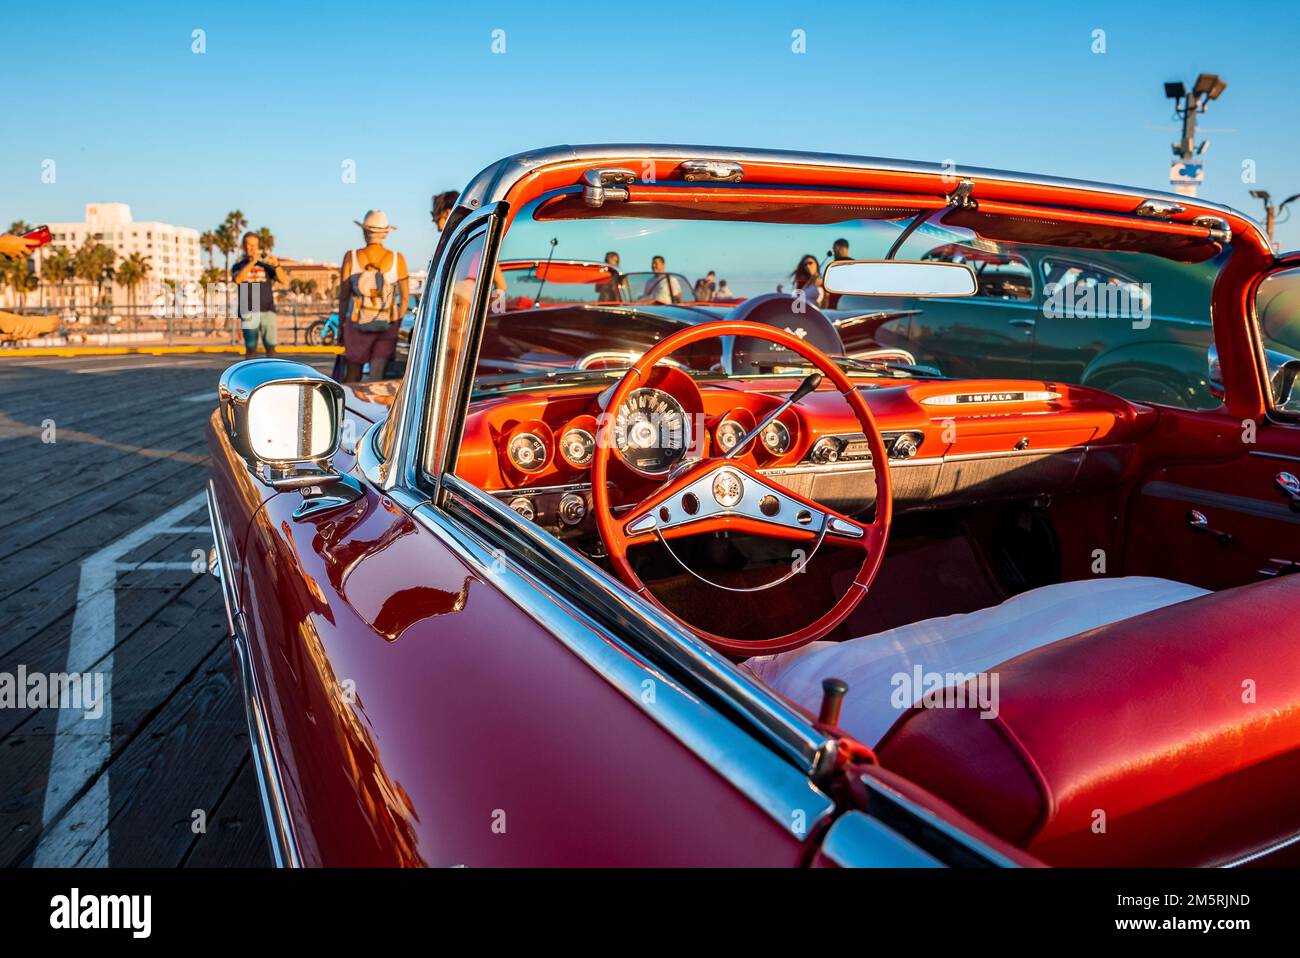 Vintage red car displayed during classic car show at Santa Monica wooden pier Stock Photo